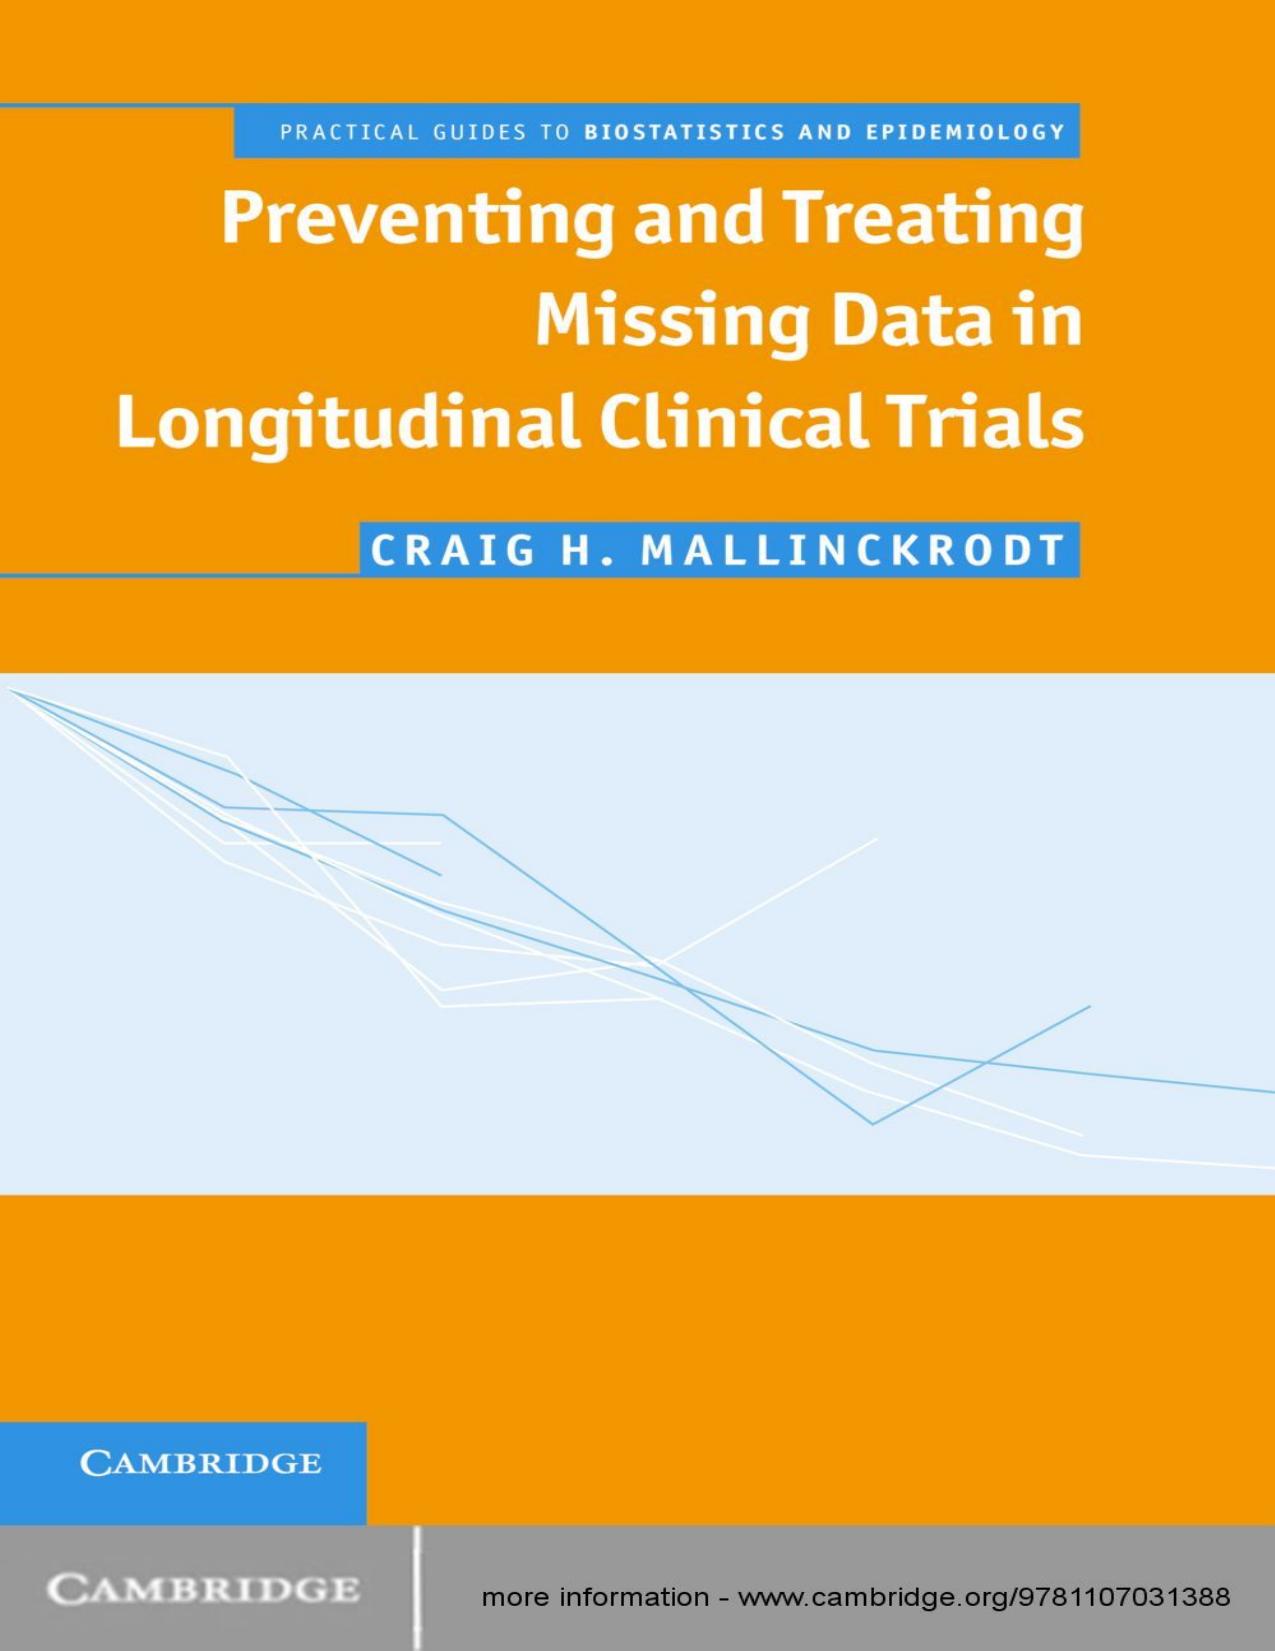 Preventing and Treating Missing Data in Longitudinal Clinical Tical Guide (Practical Guides to Biostatistics and Epidemiology).jpg